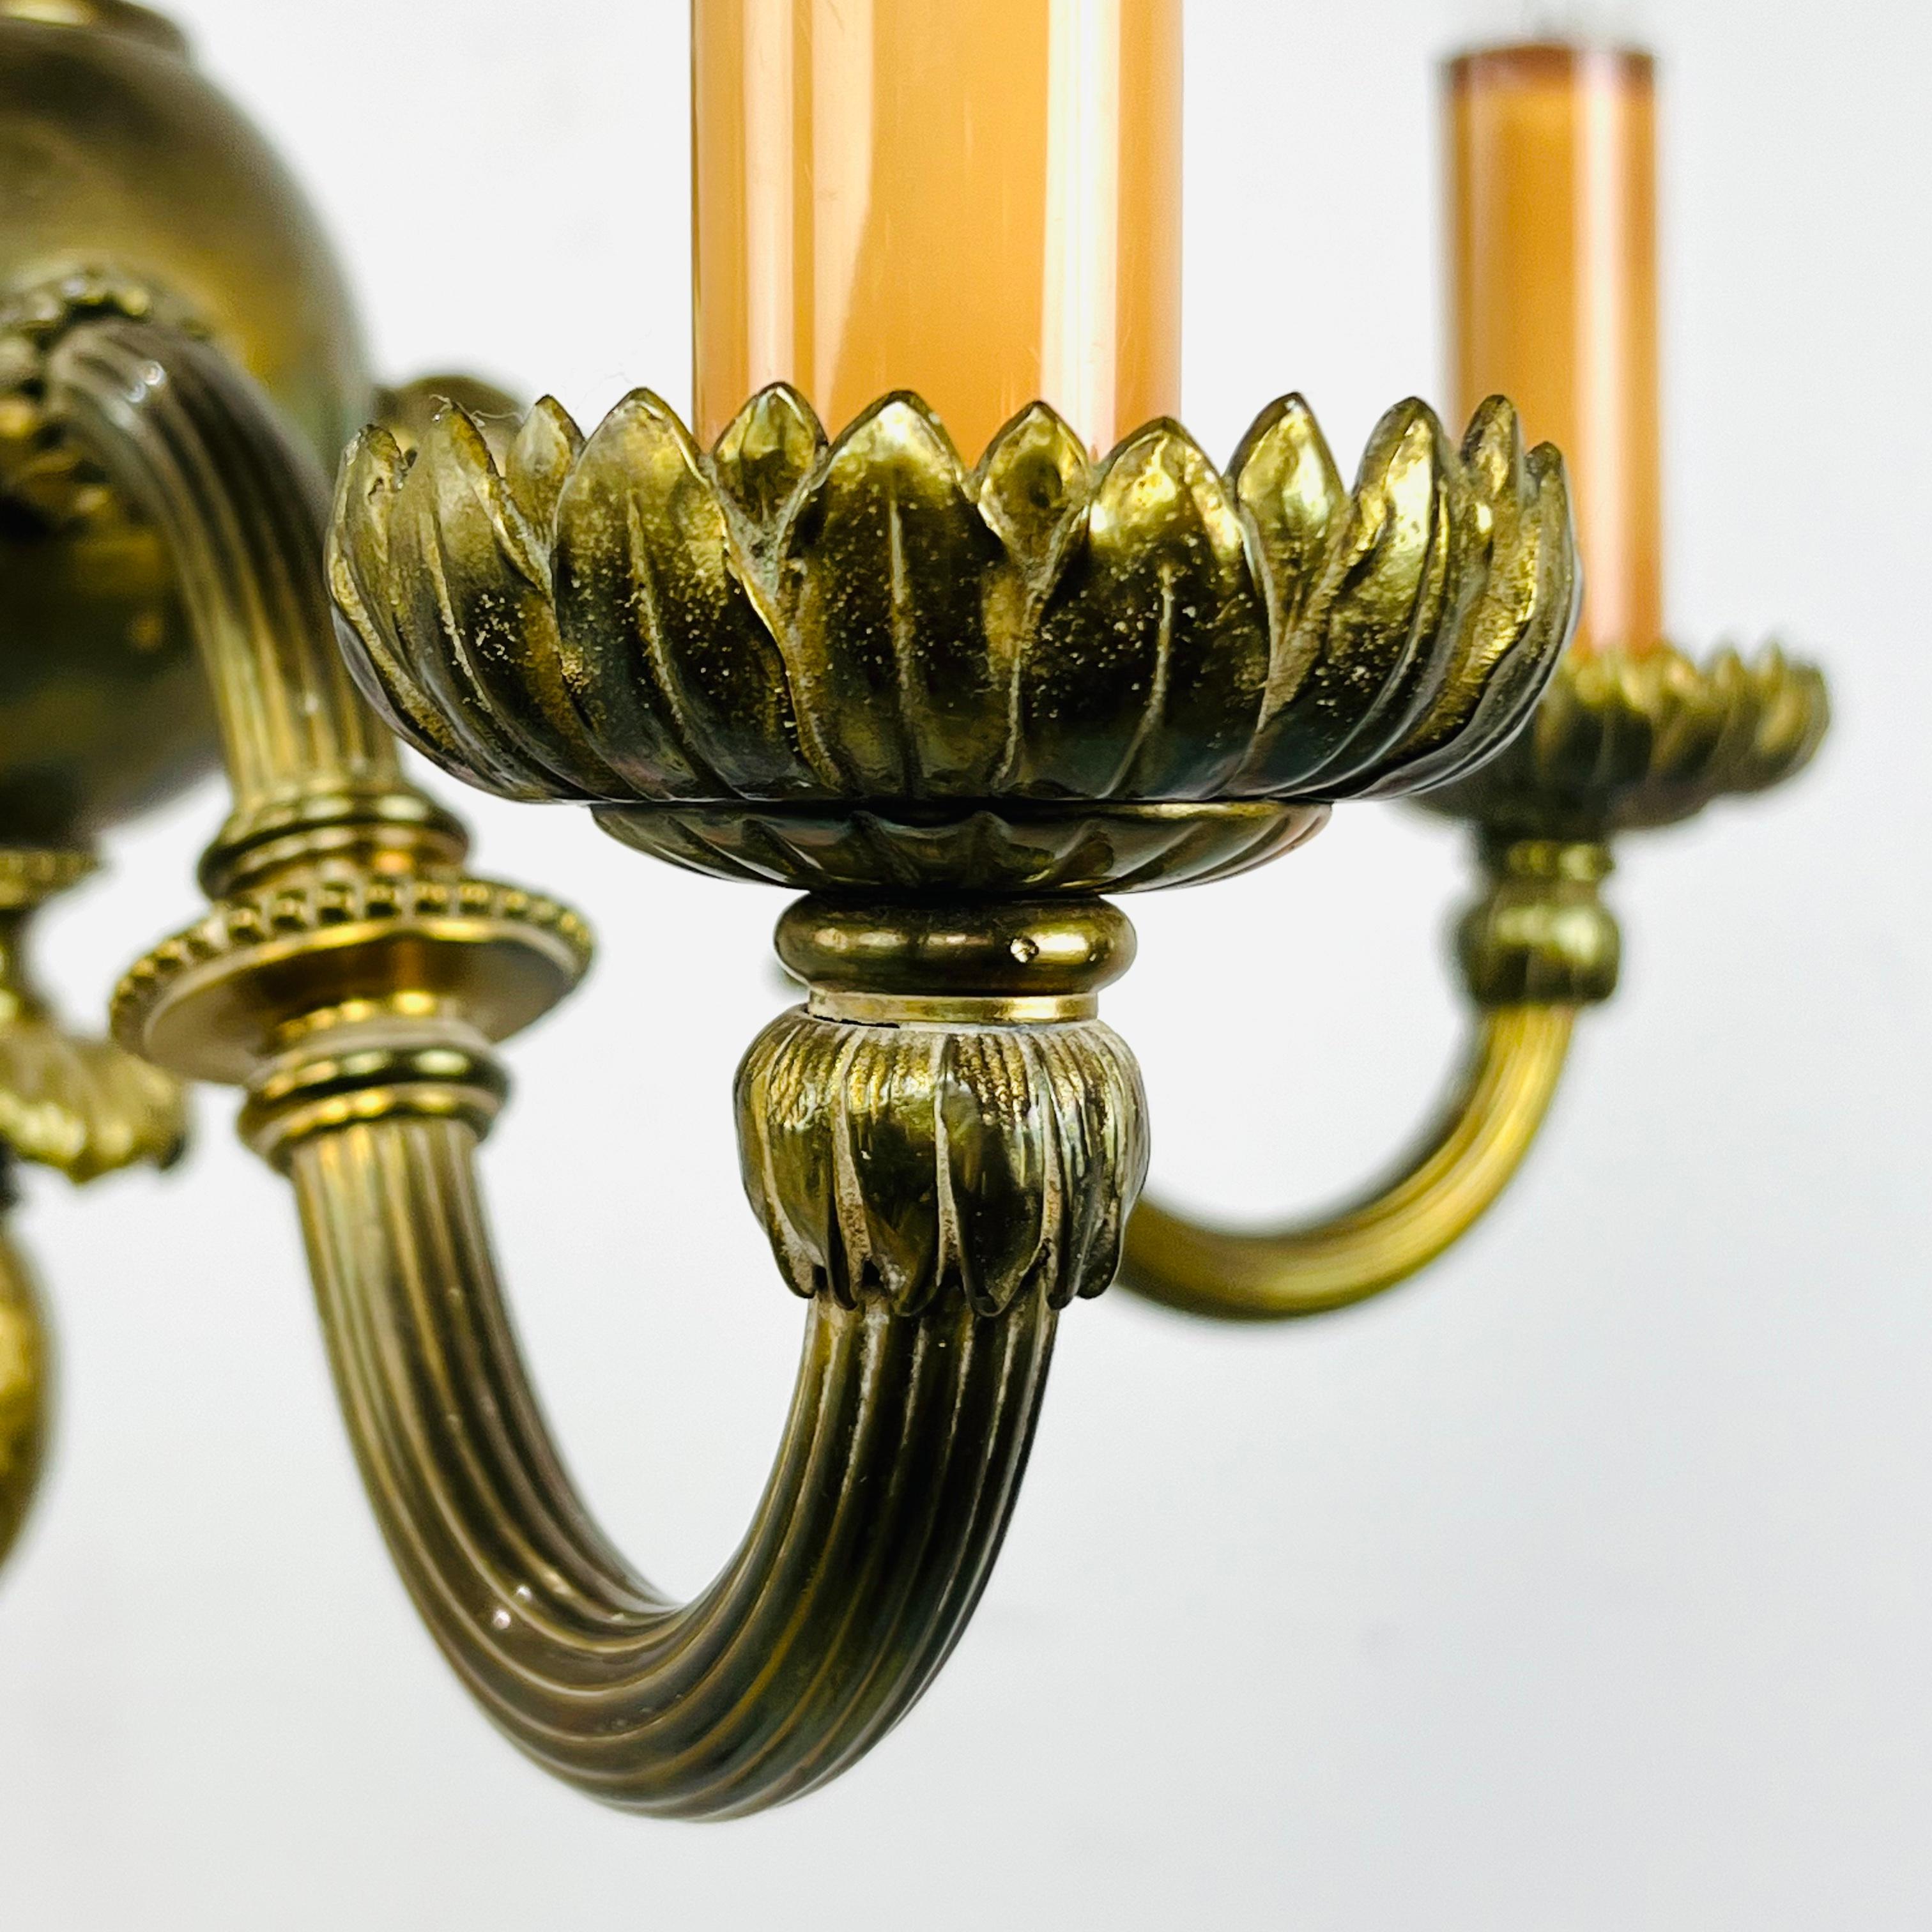 Pair of Bronze Art Nouveau 4 Arm Candlestick Chandeliers In Good Condition For Sale In Dallas, TX